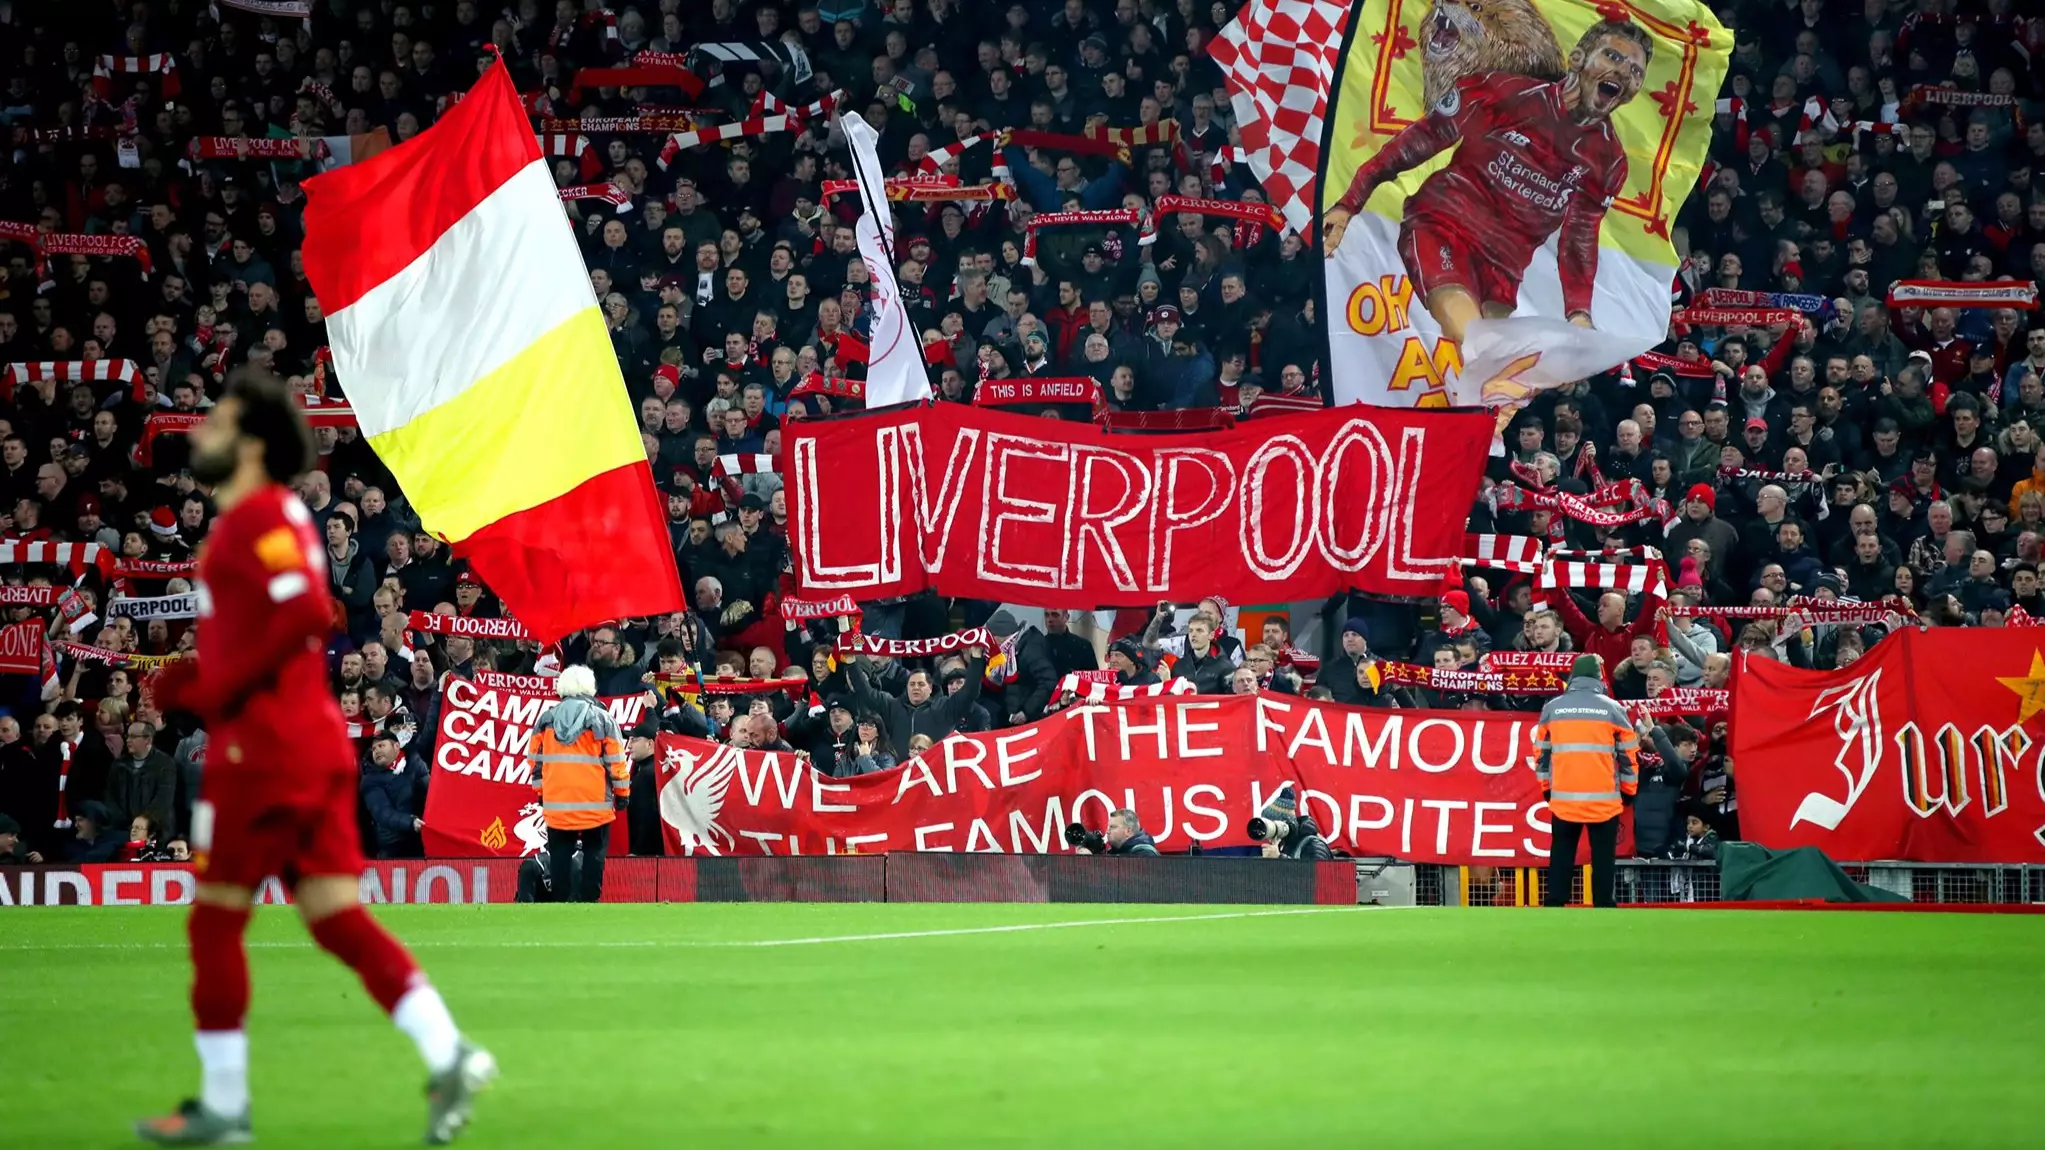 Liverpool U-Turn Over Decision To Furlough Staff Say They Are 'Truly Sorry'